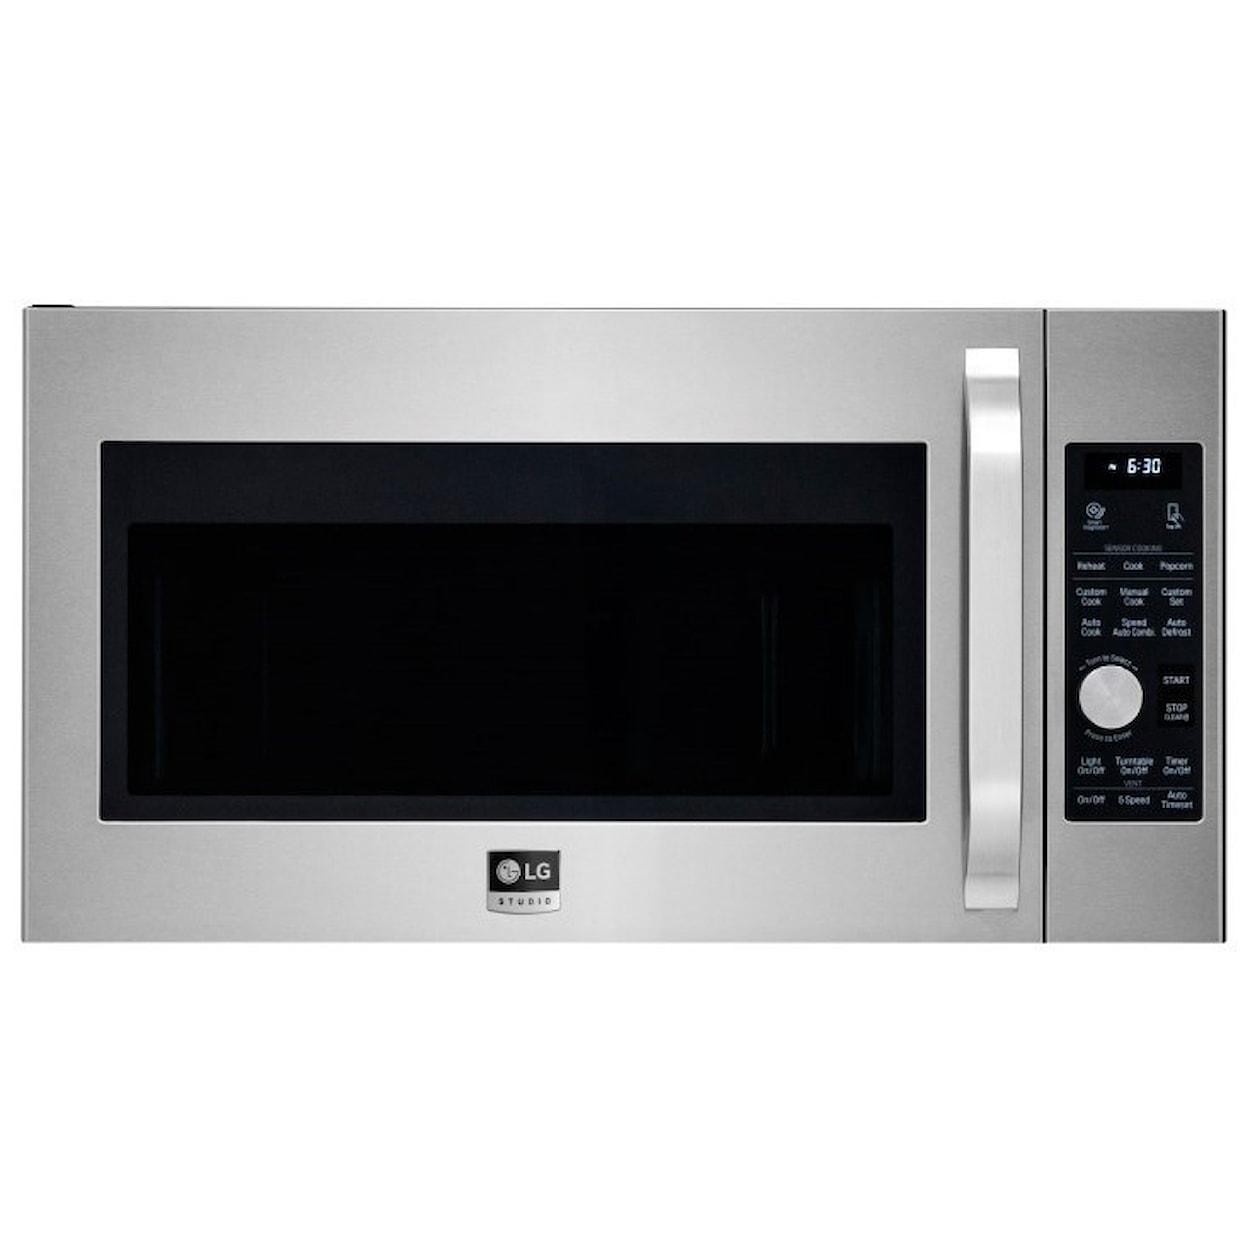 LG Appliances Microwaves 1.7 cu. Ft. Over-The-Range Microwave Oven